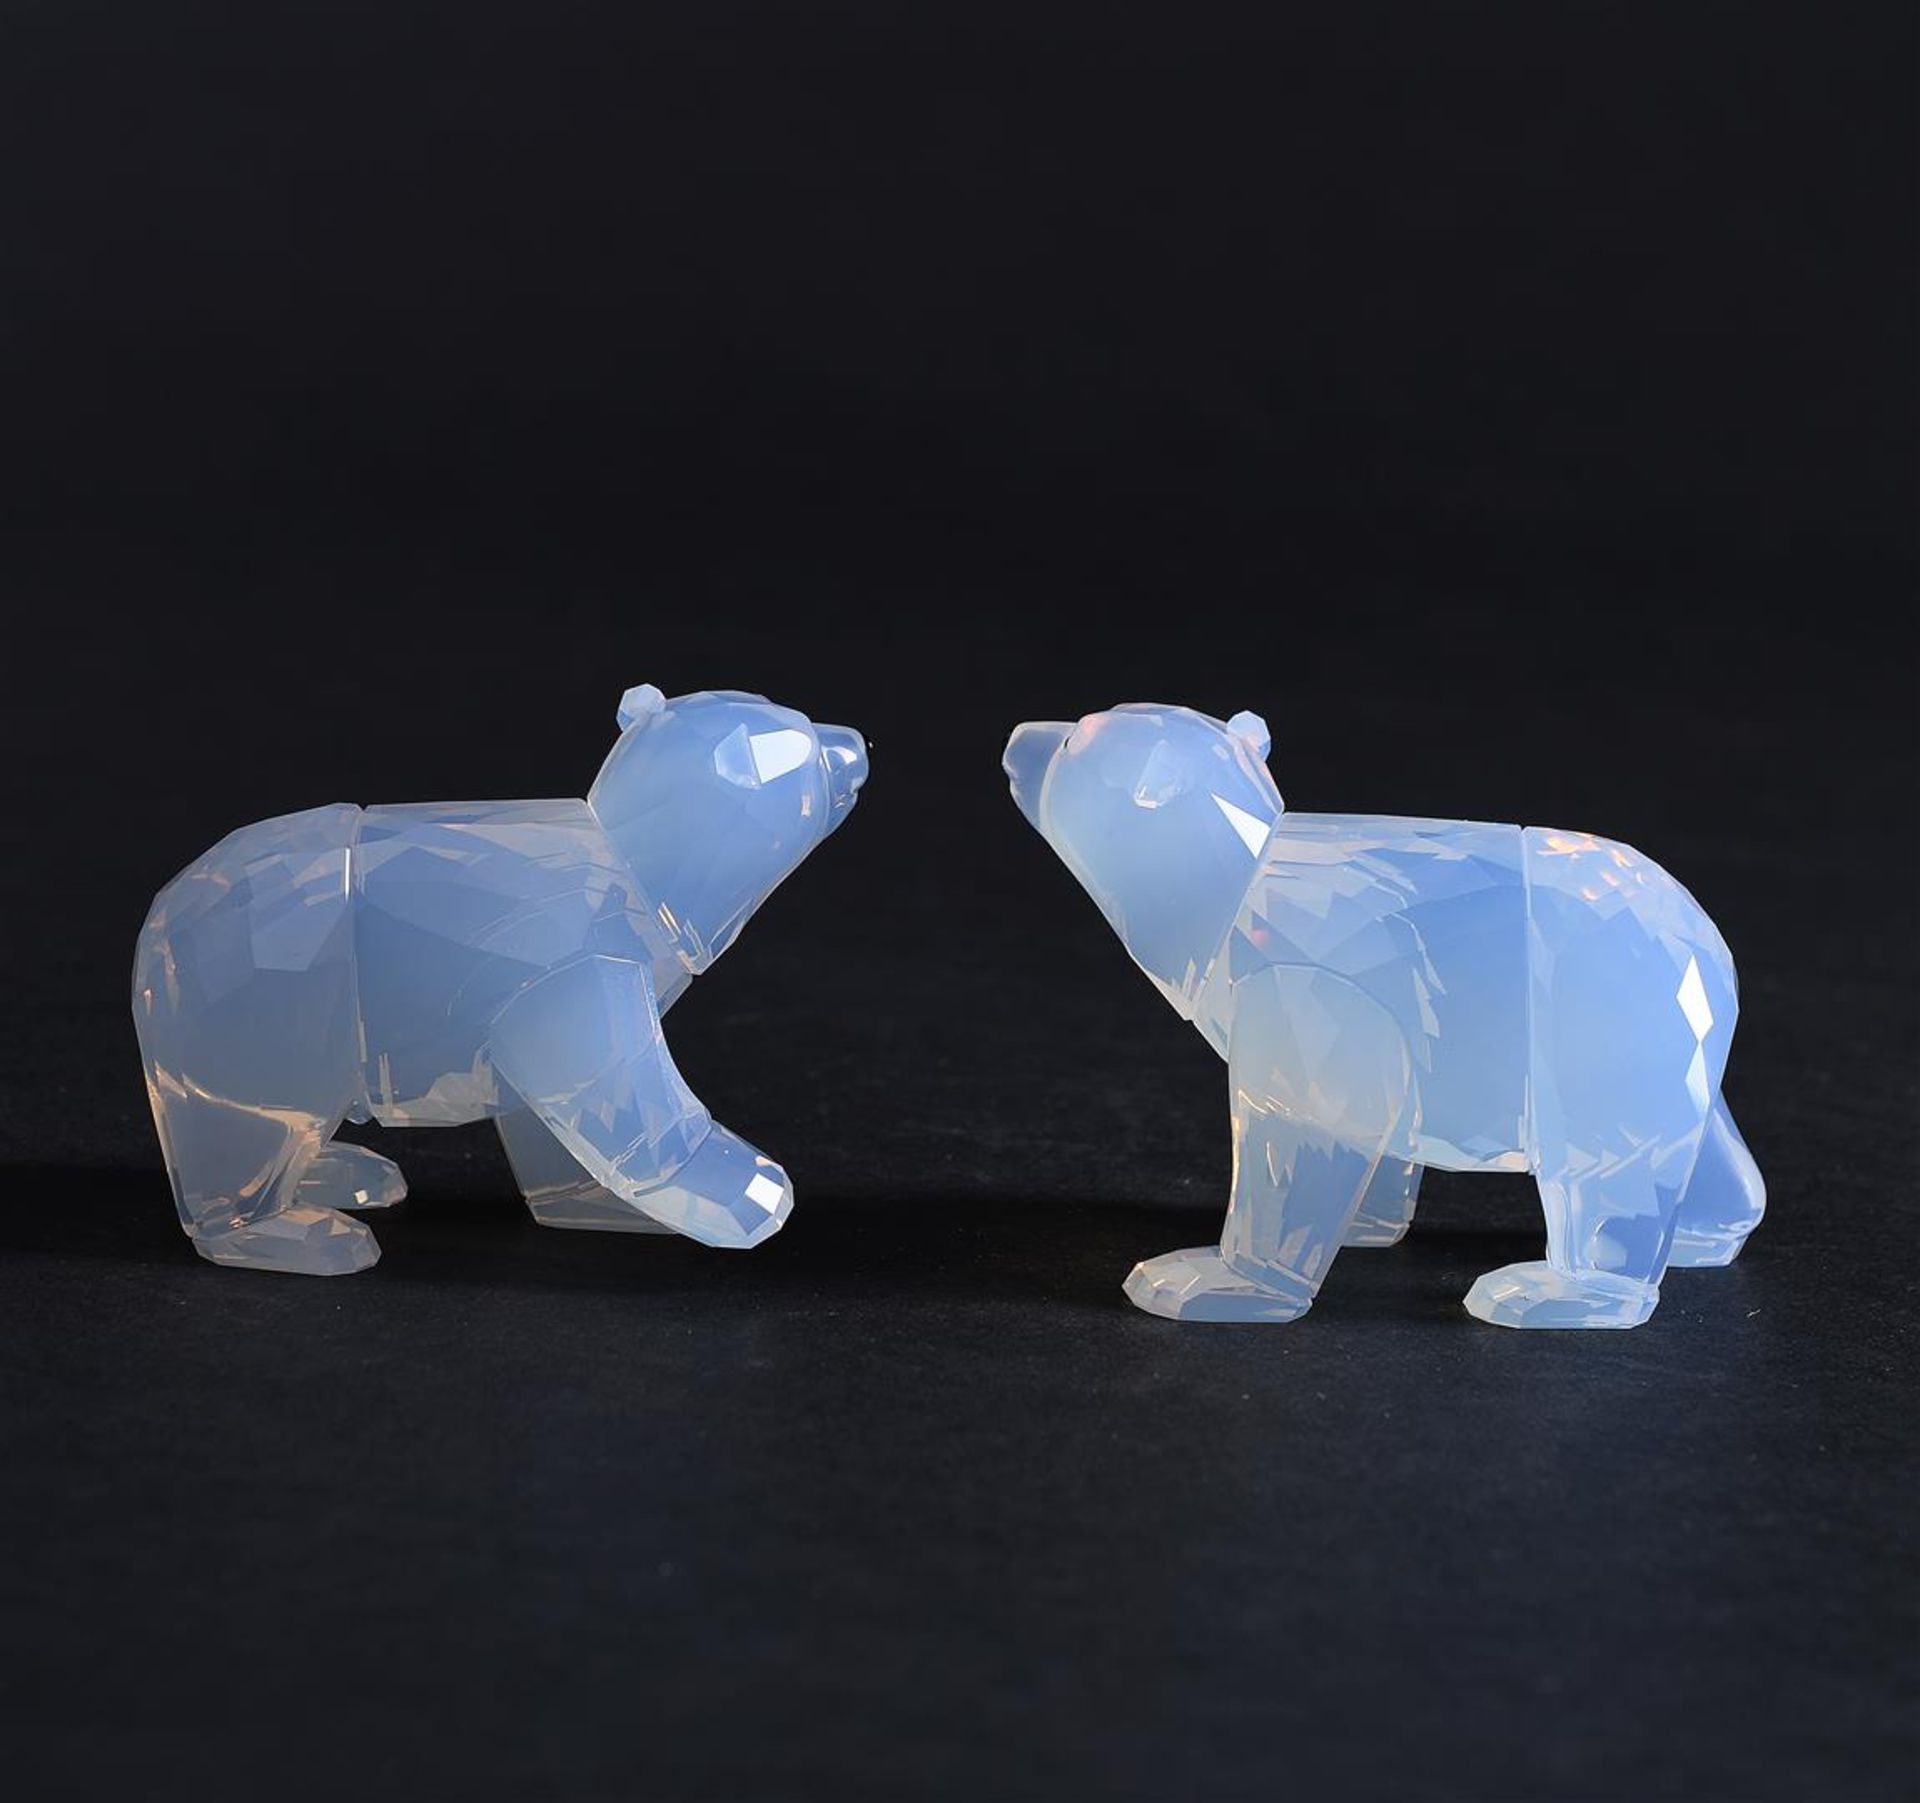 Swarovski SCS, Annual Edition 2011 - Arctic Bear Boy White Opal, Year of Edition 2011 ,1080774. Incl - Image 4 of 5